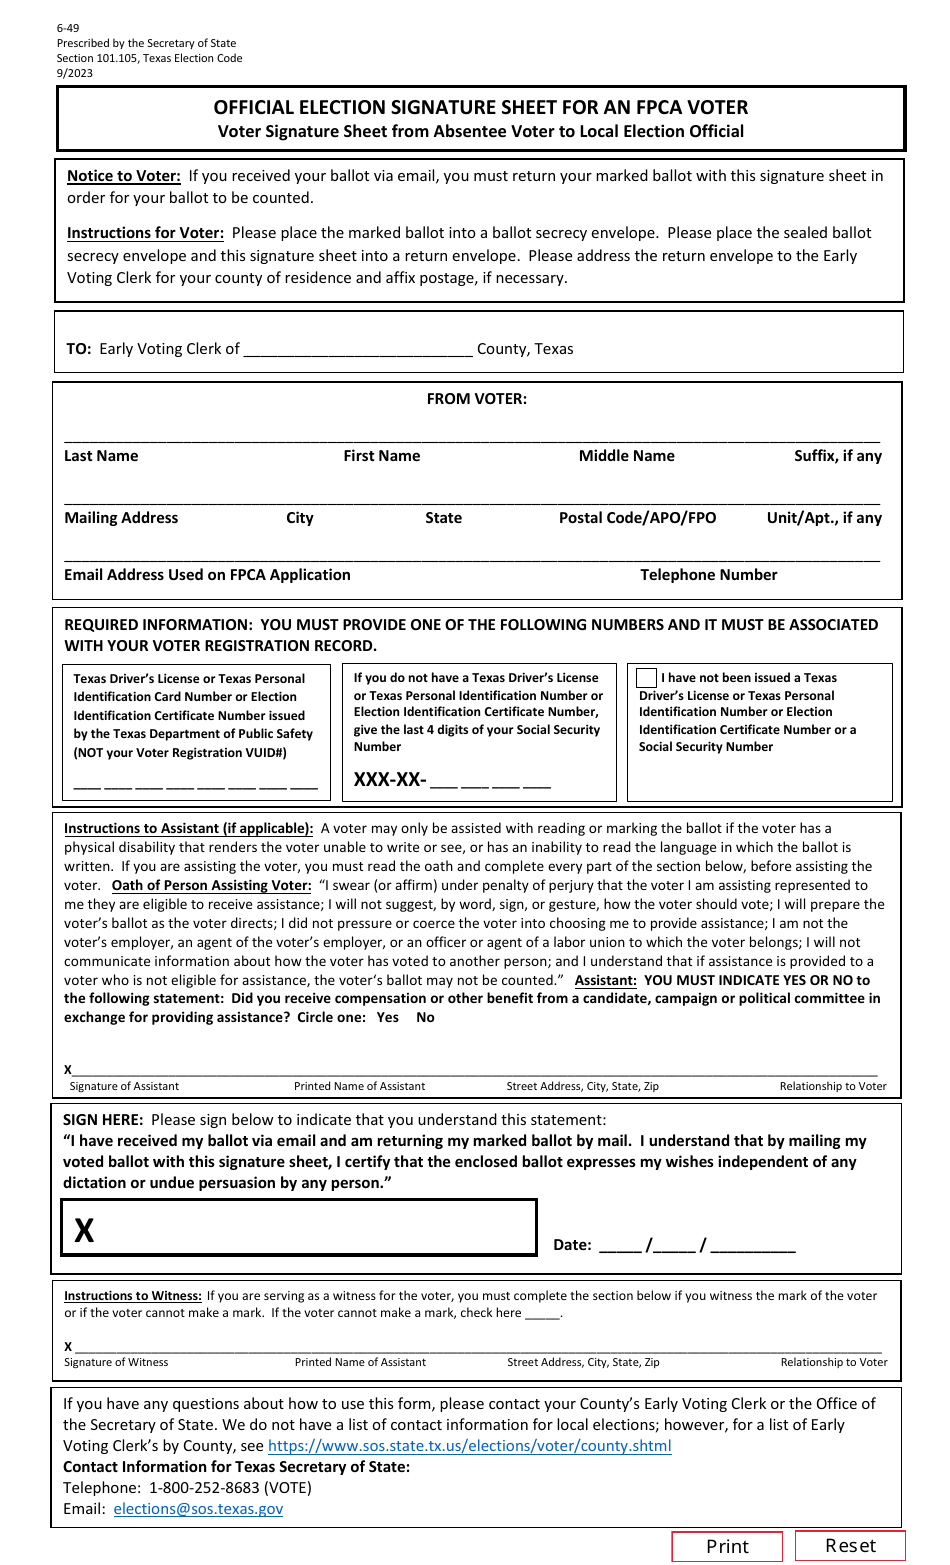 Form 6-49 Official Election Signature Sheet for an Fpca Voter - Texas (English / Spanish), Page 1